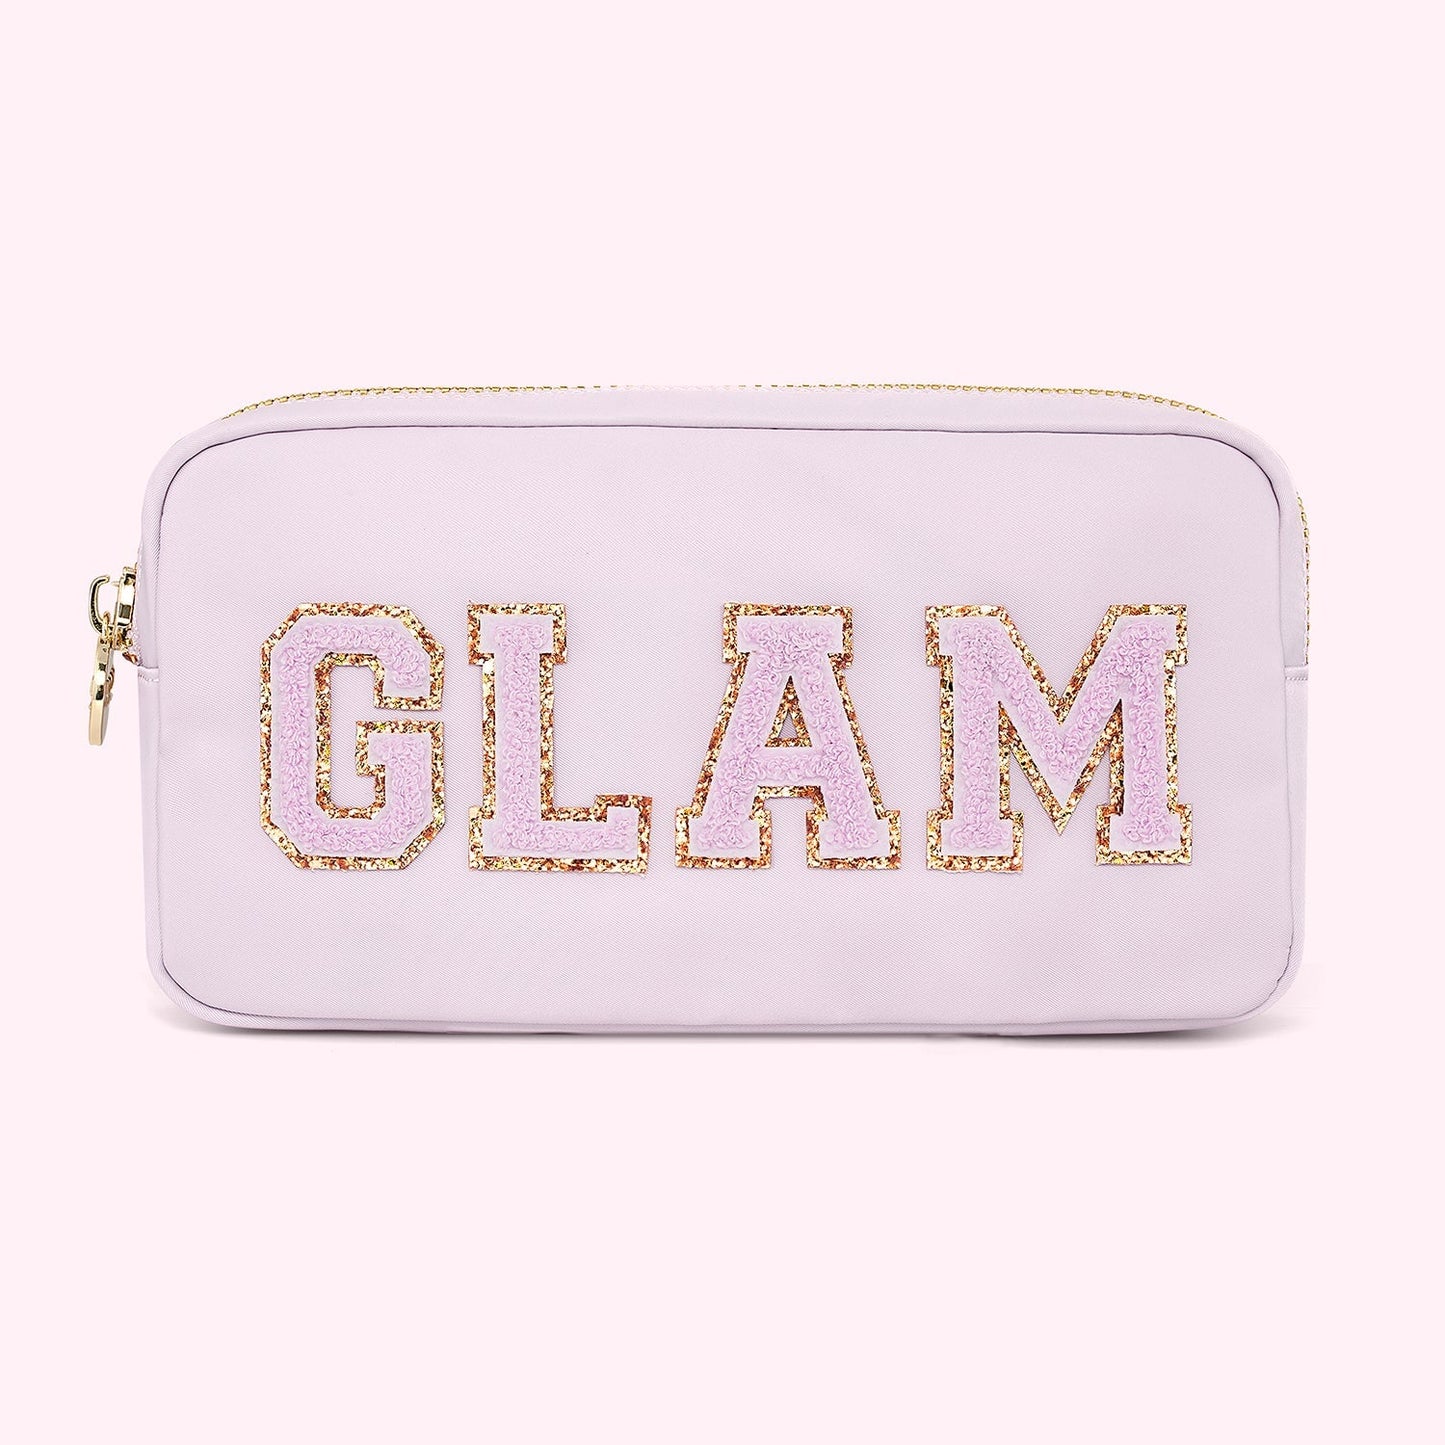 Glam Small Pouch - Makeup Bag | Stoney Clover Lane Lilac